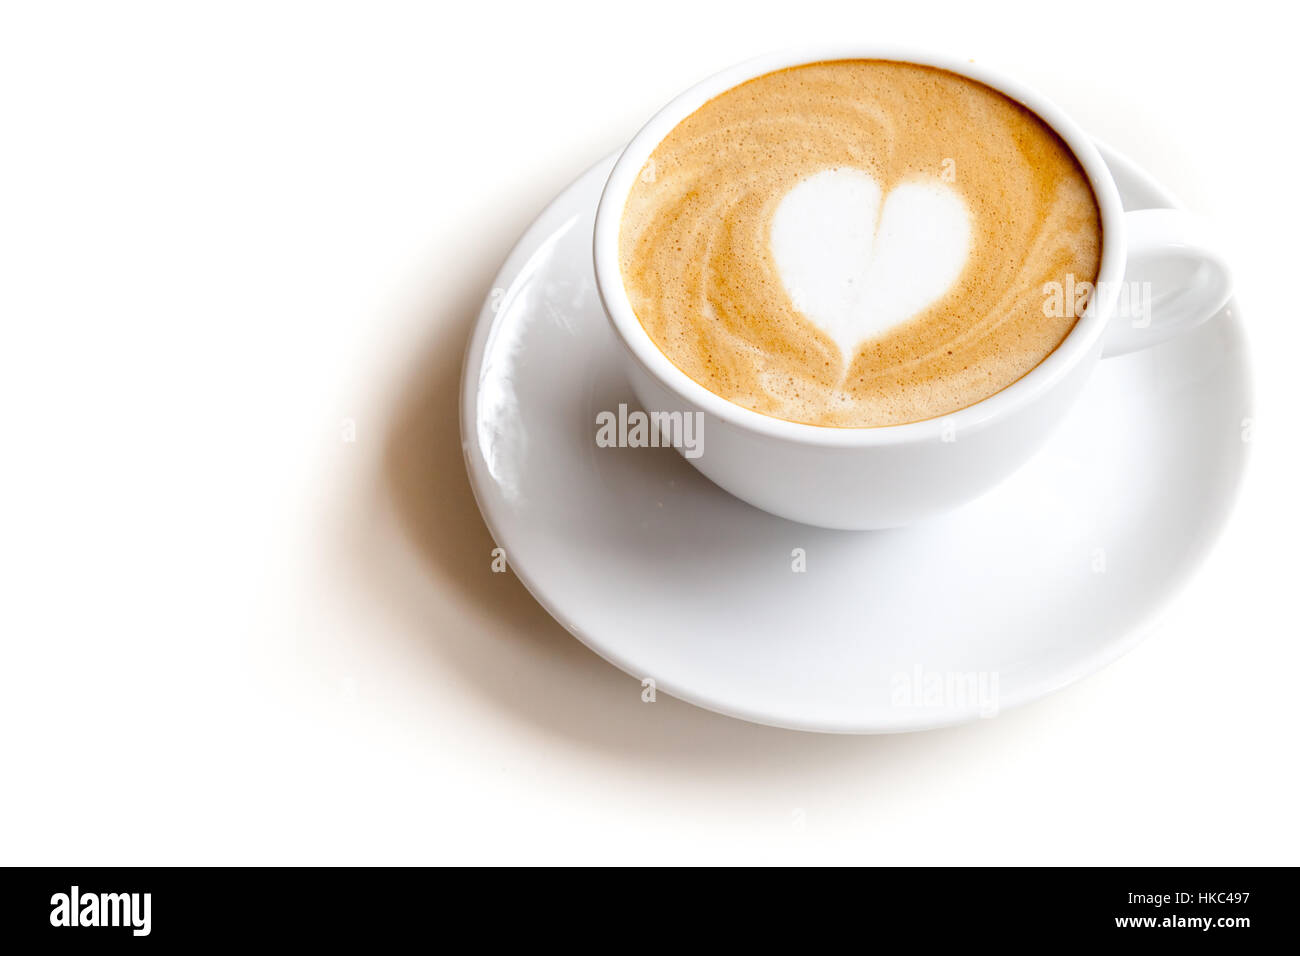 Coffee cup of latte art heart shape on white background isolated Stock Photo